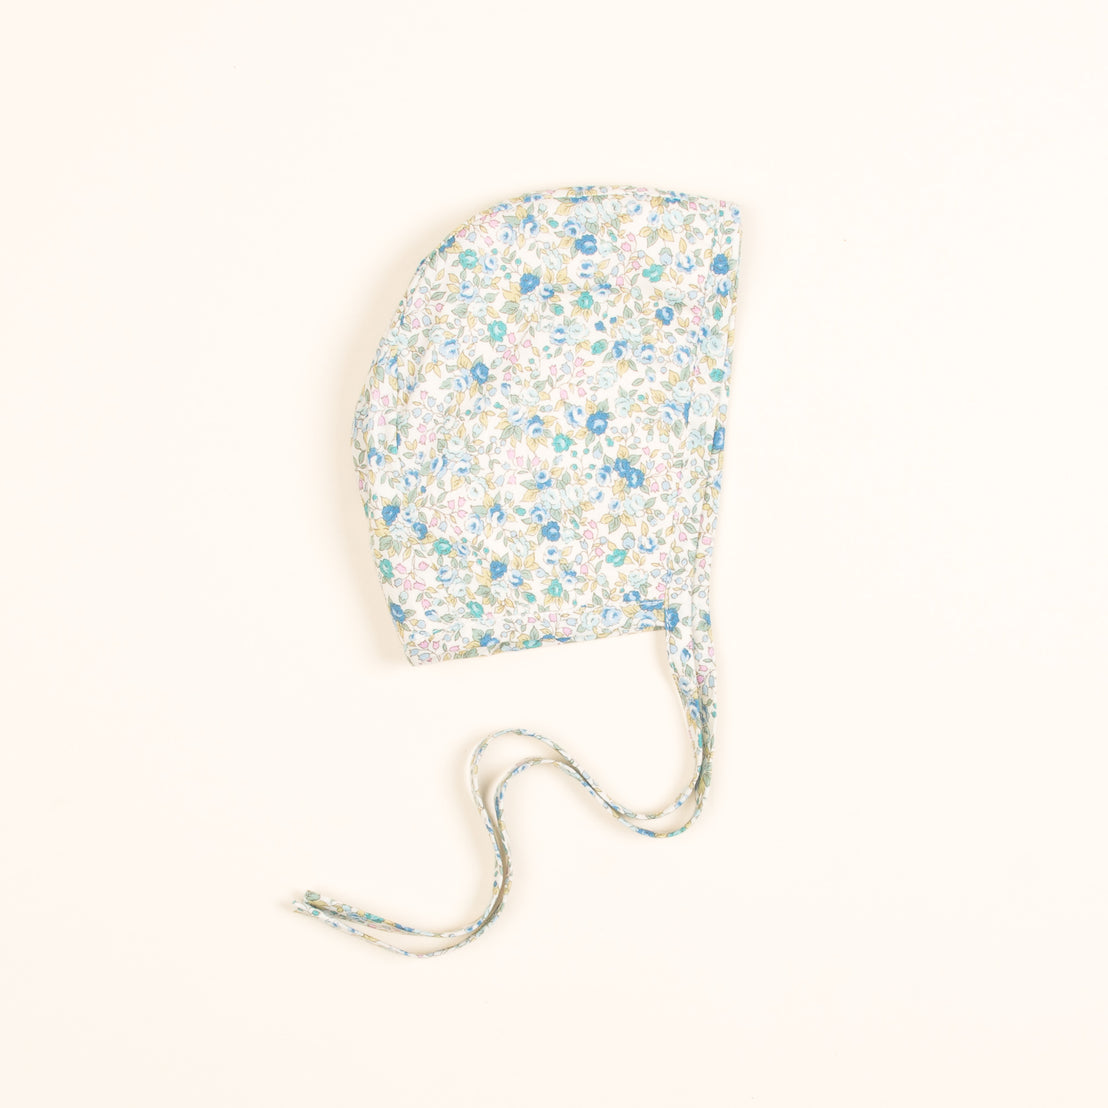 An upscale, handcrafted Petite Fleur Bonnet with a light background, featuring small blue, green, and yellow flowers. The bonnet has a long string tie at the bottom.